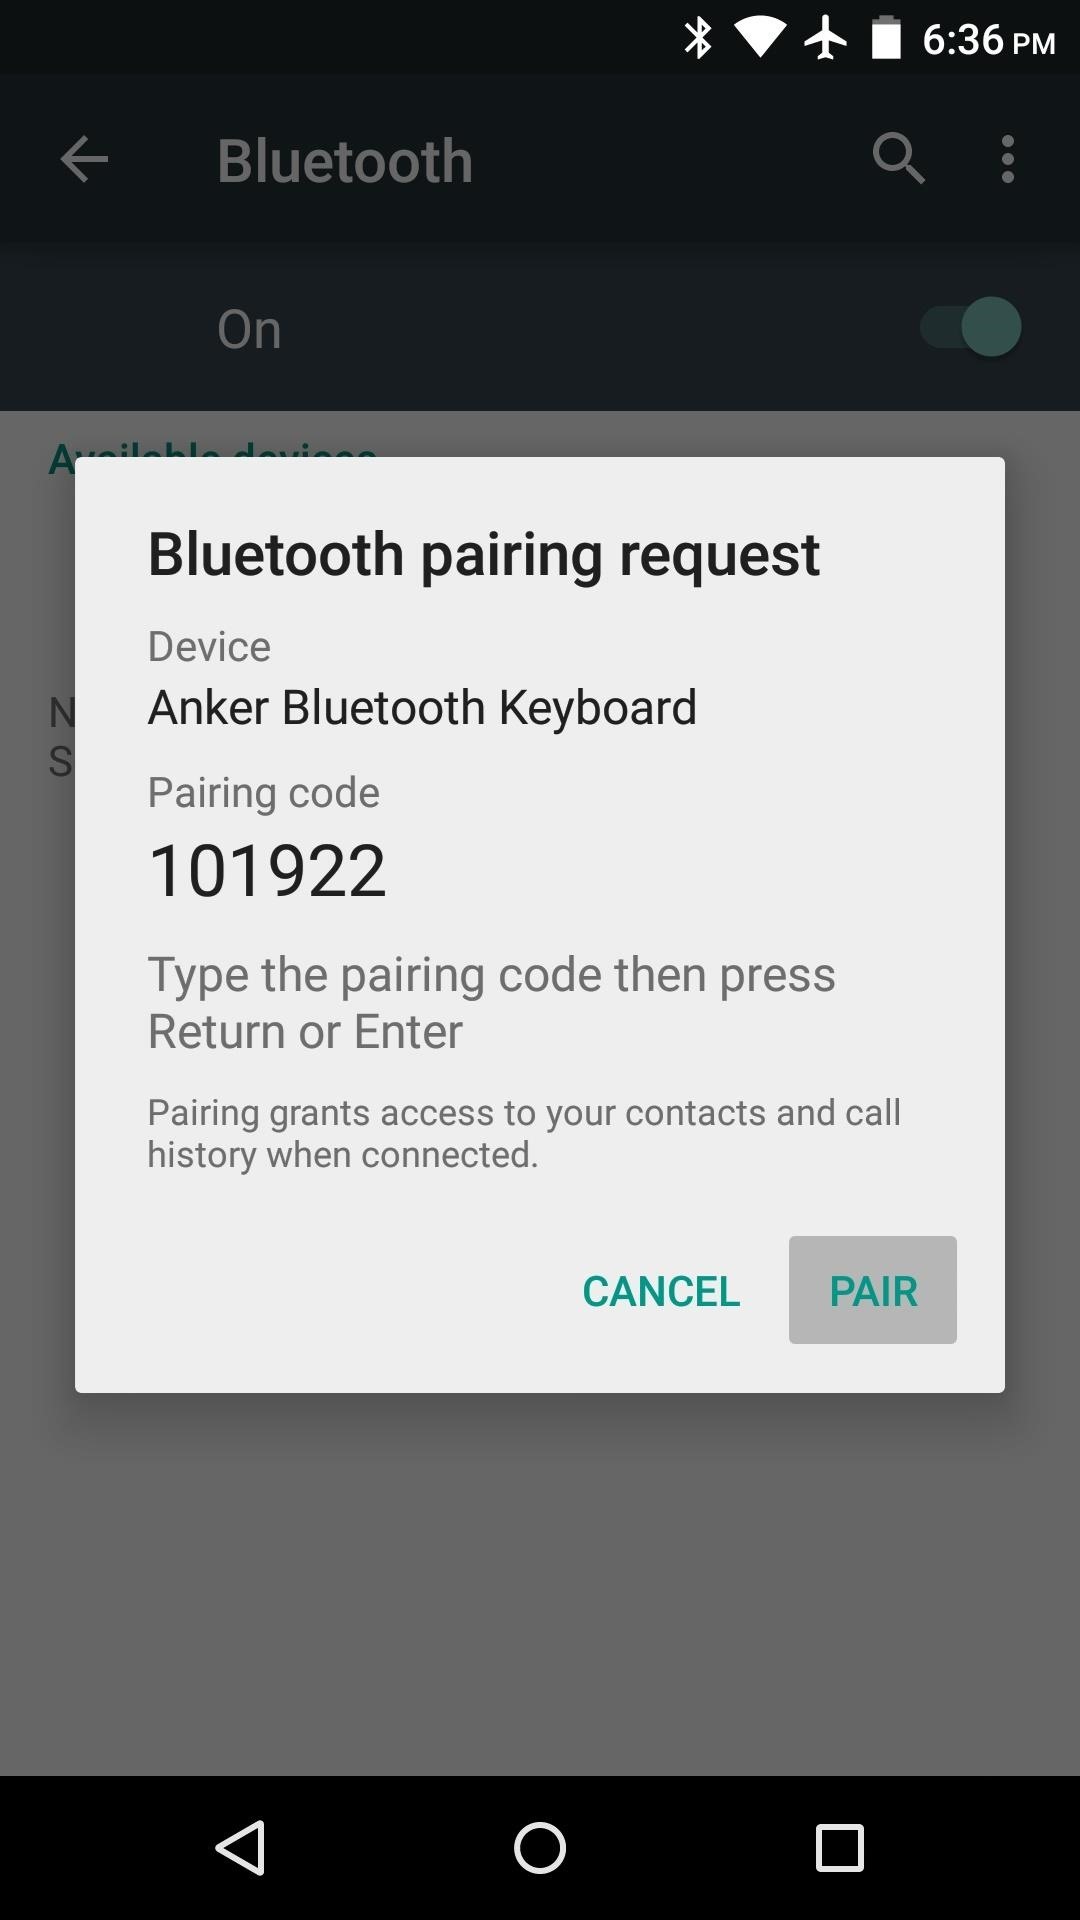 how to pair a bluetooth device in android